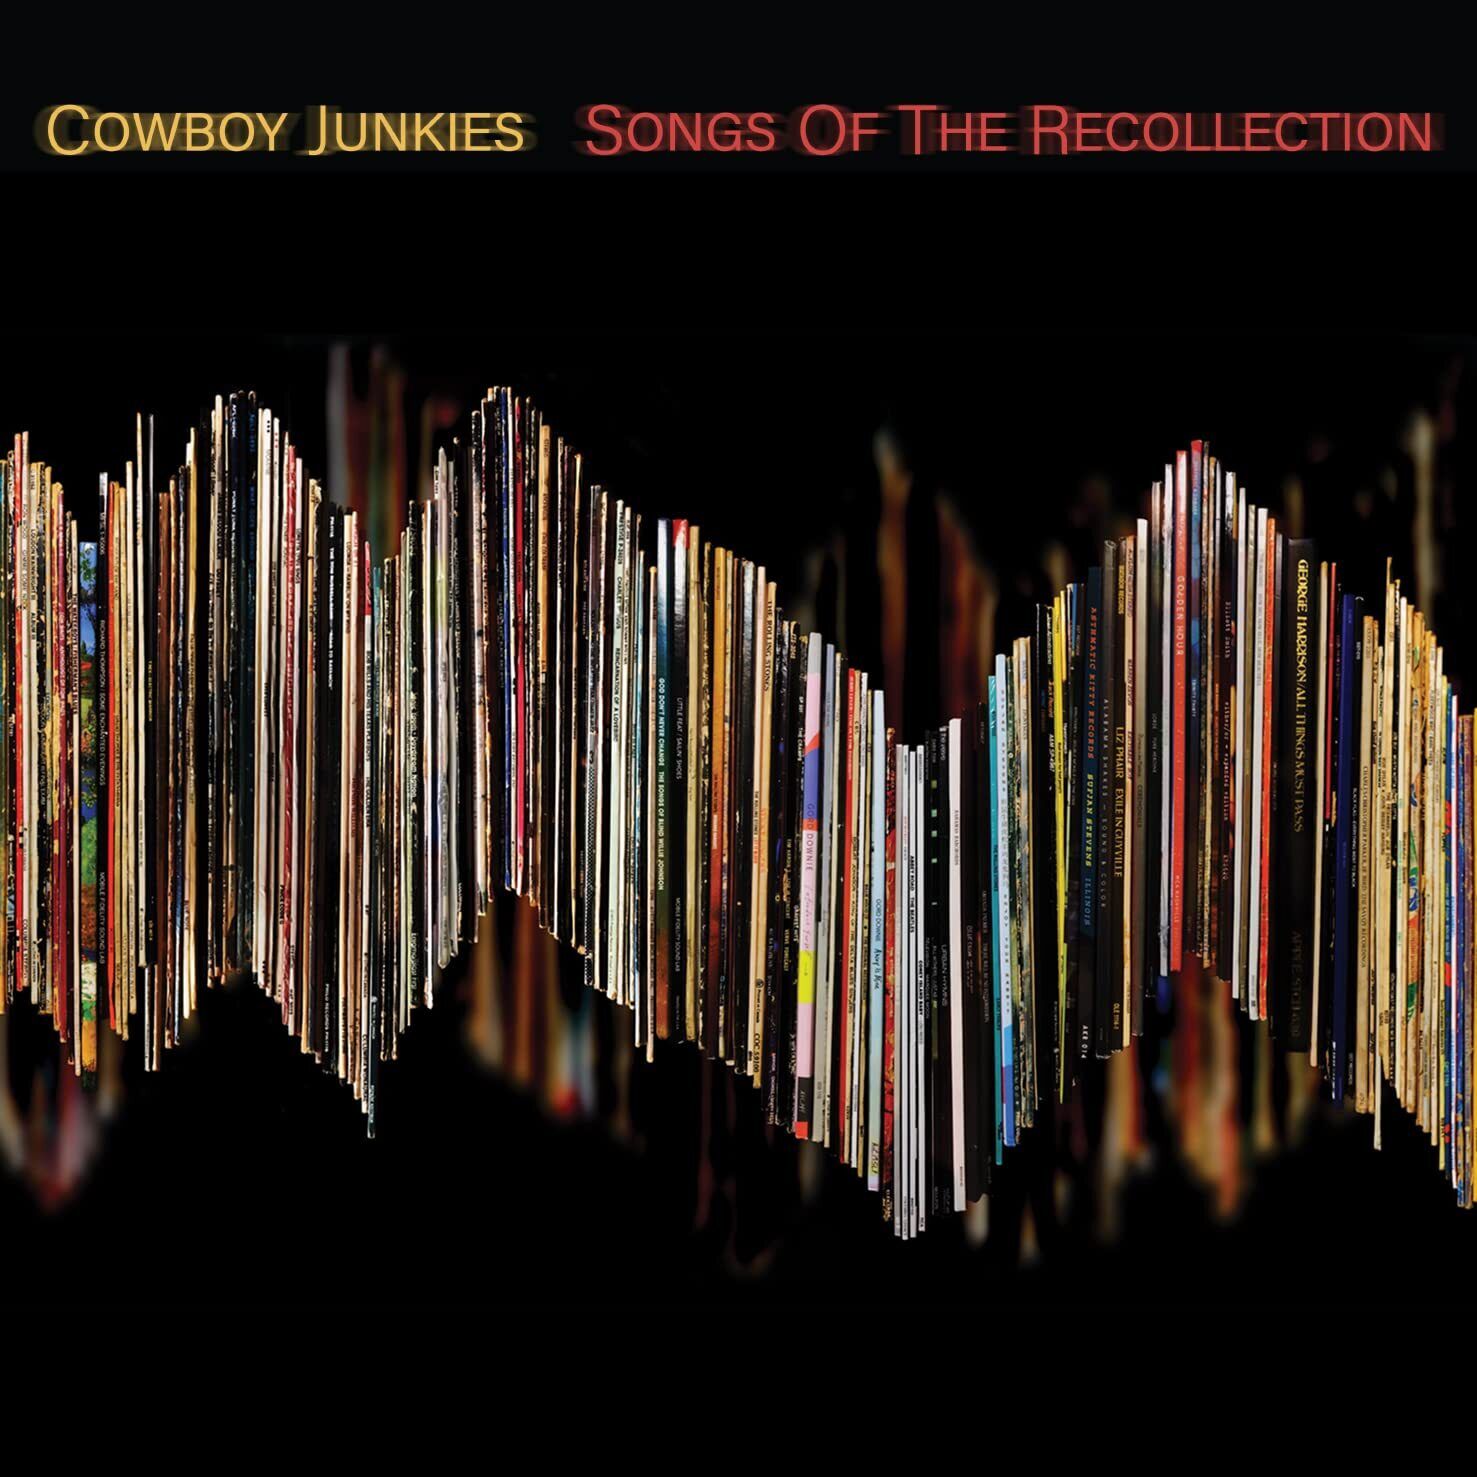 Cowboy Junkies SONGS OF THE RECOLLECTION (CD)